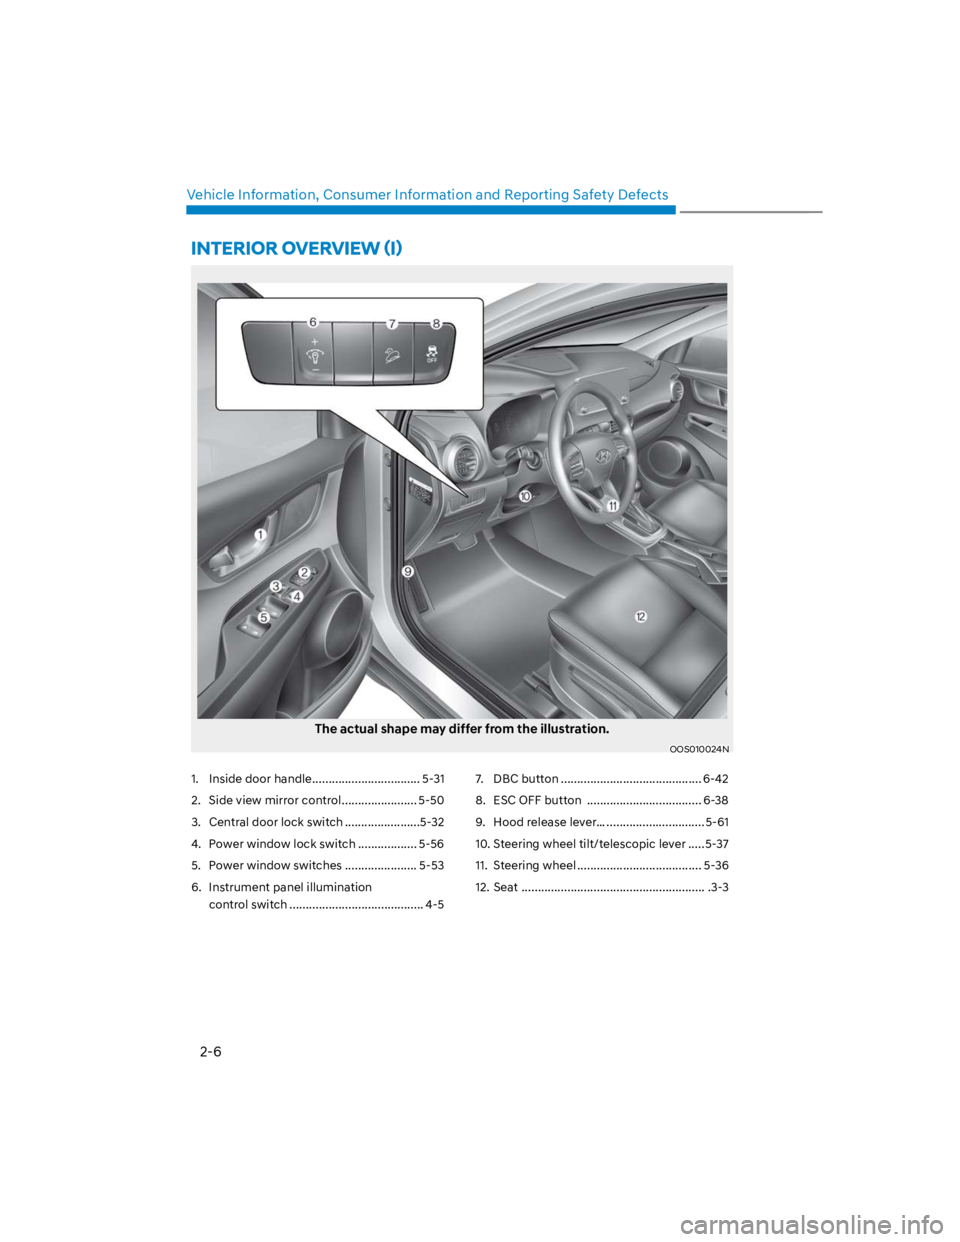 HYUNDAI KONA 2022 User Guide 2-6
Vehicle Information, Consumer Information and Reporting Safety Defects
The actual shape may differ from the illustration.
OOS010024N
1.  Inside door handle ................................. 5-31
2